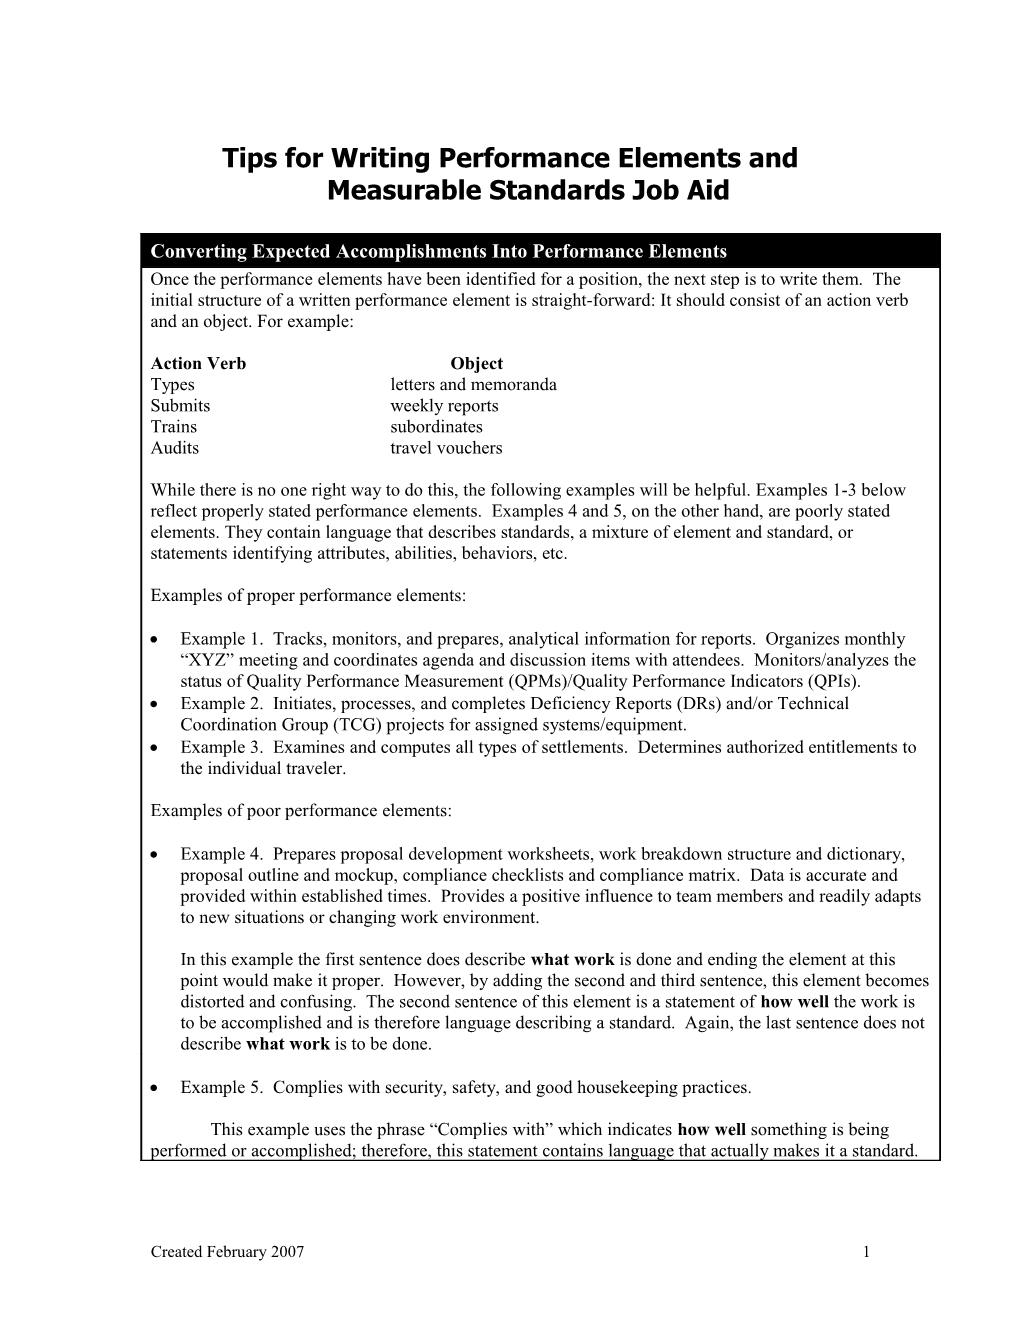 Tips for Writing Performance Elements and Measurable Standards Job Aid